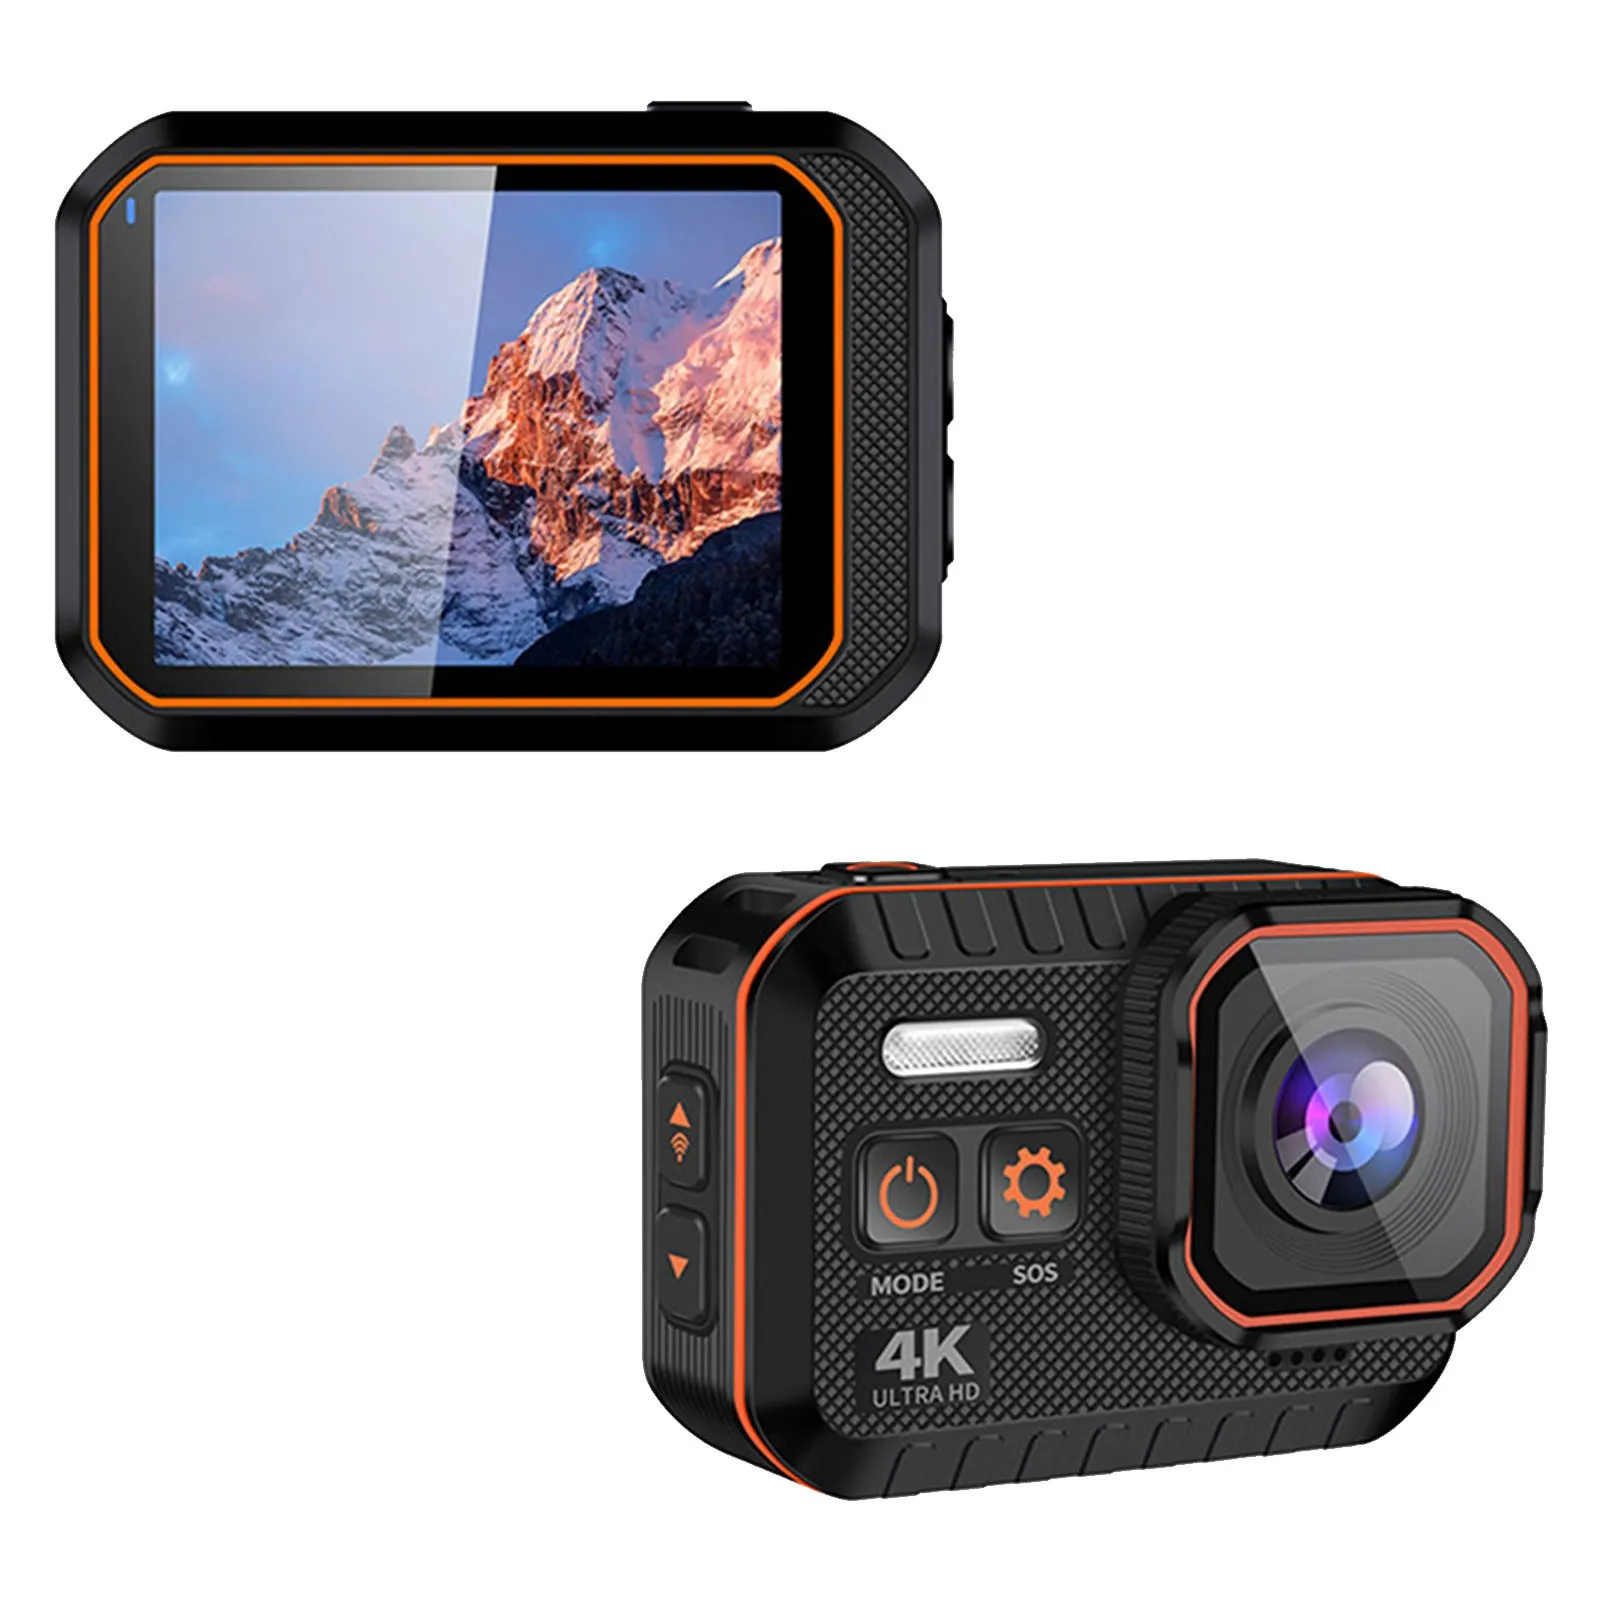 Waterproof action camera 20MP sports underwater Waterproof camera 20MP photo 1080p live broadcast 2 rechargeable battery Rushed enlarge